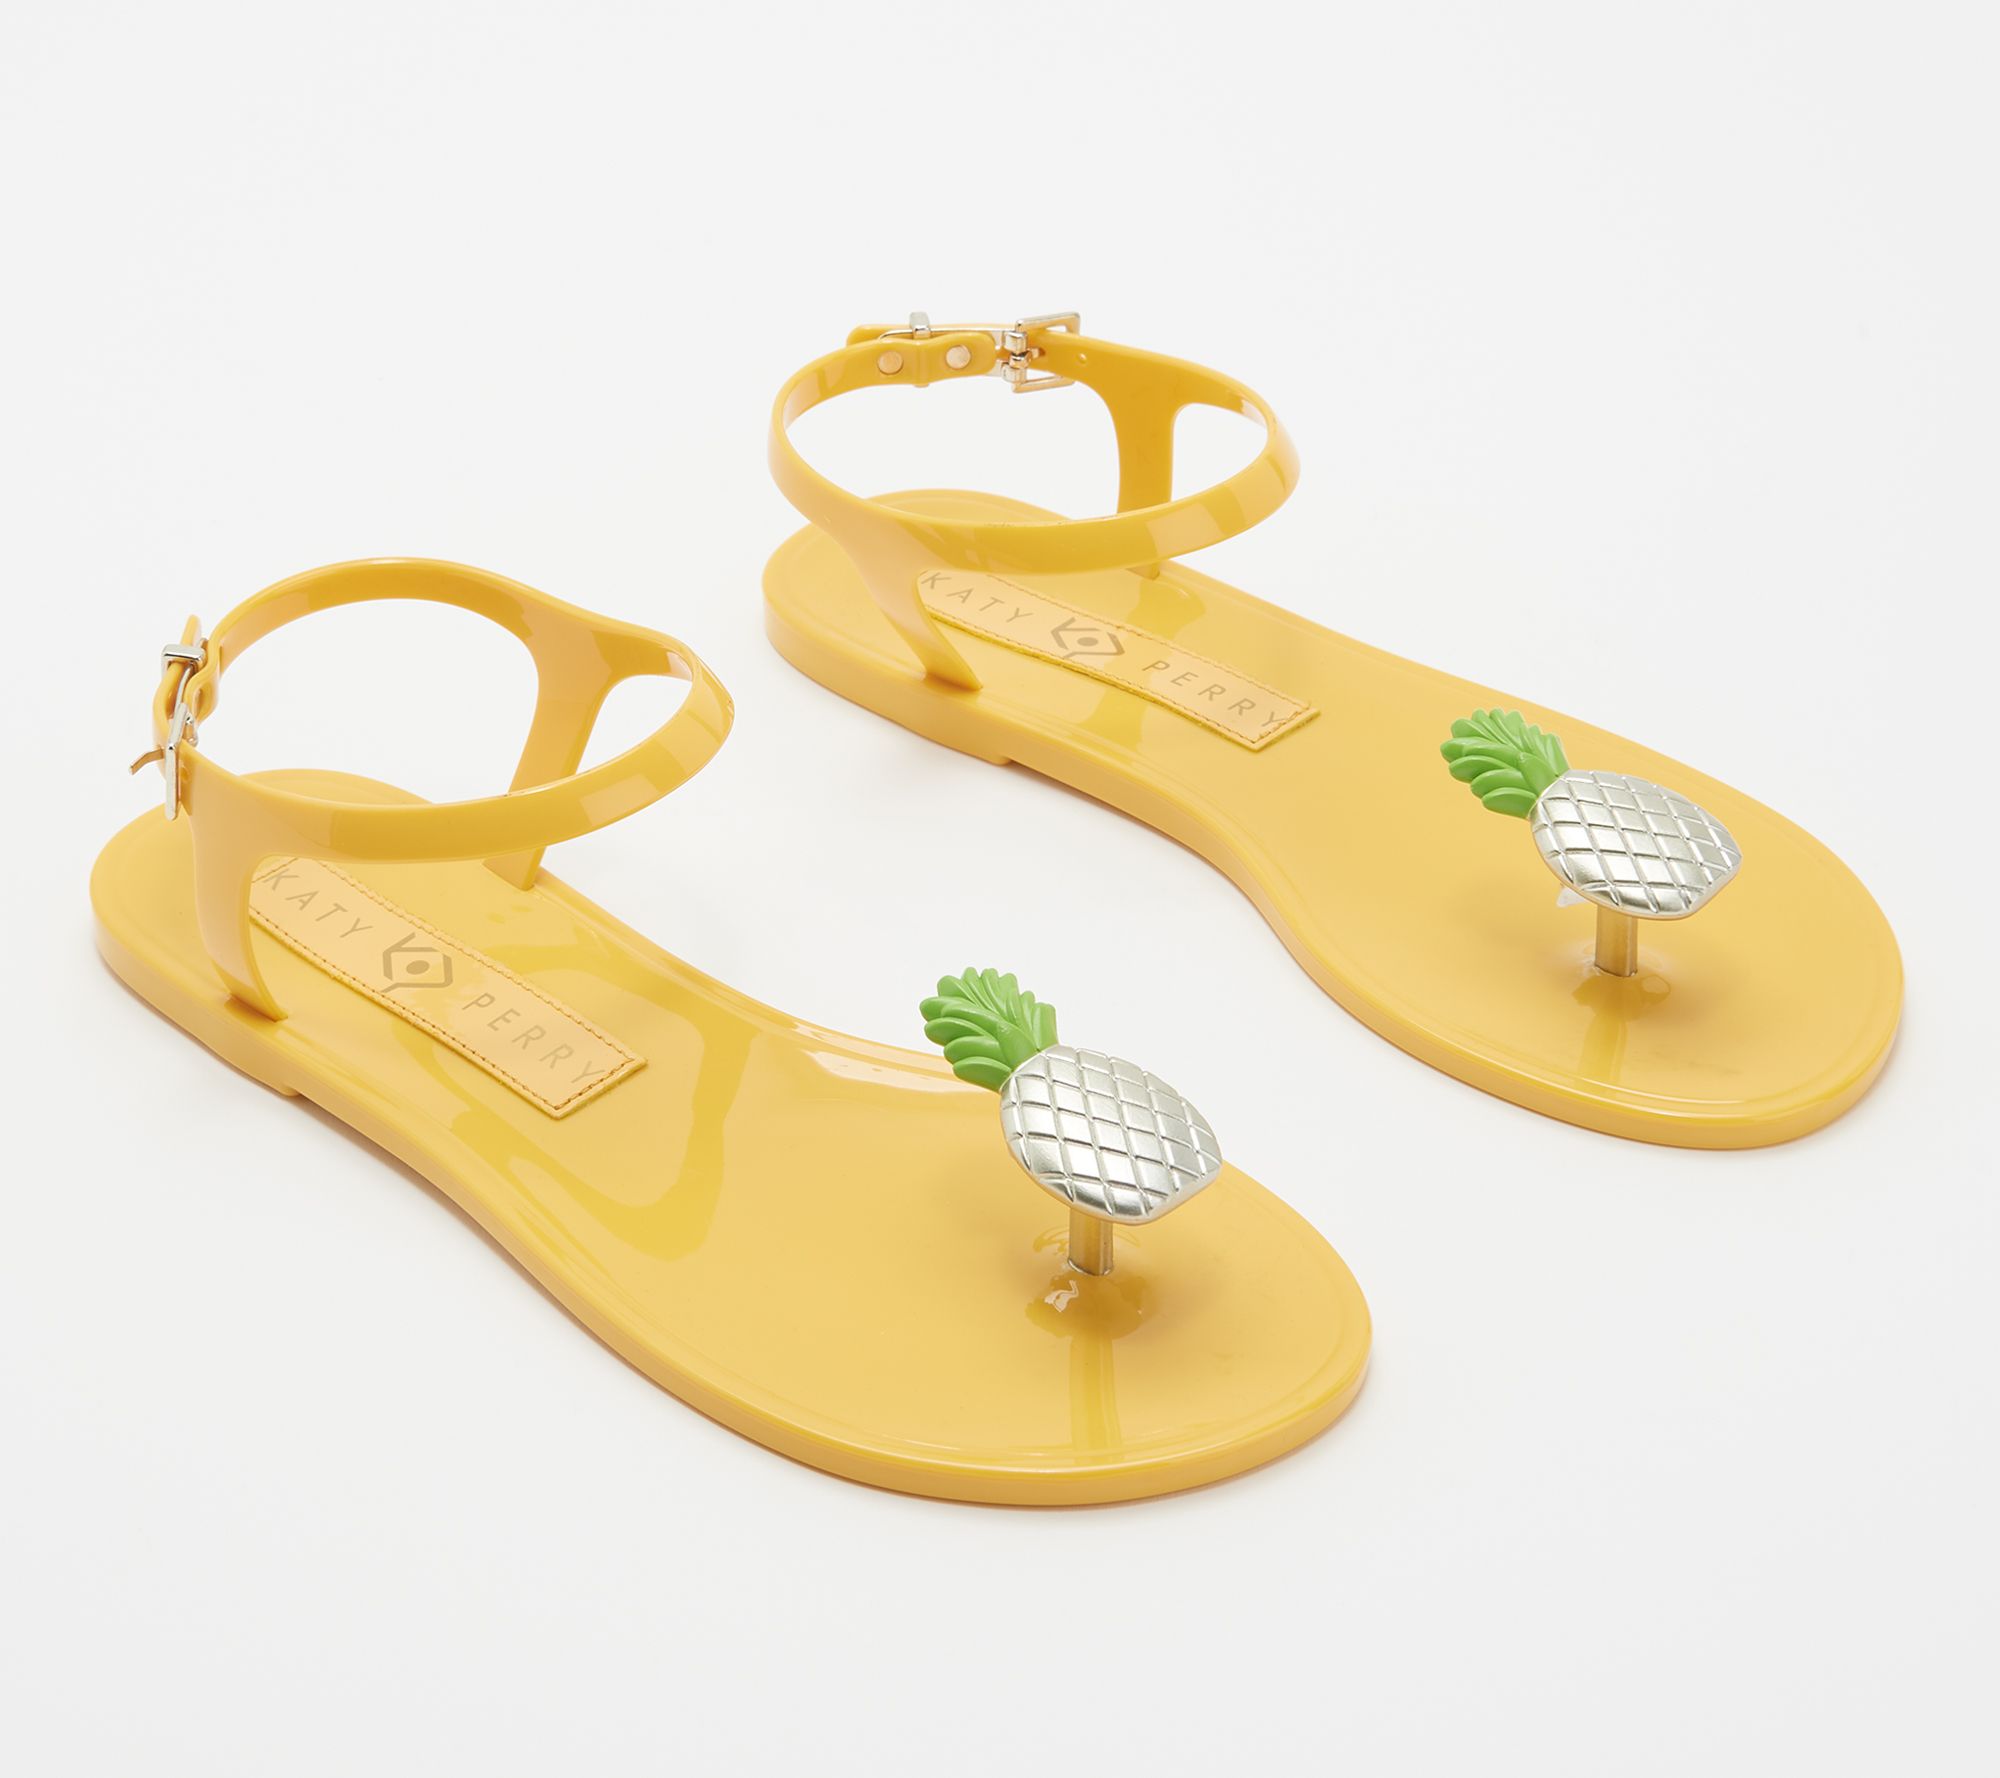 jelly sandals katy perry